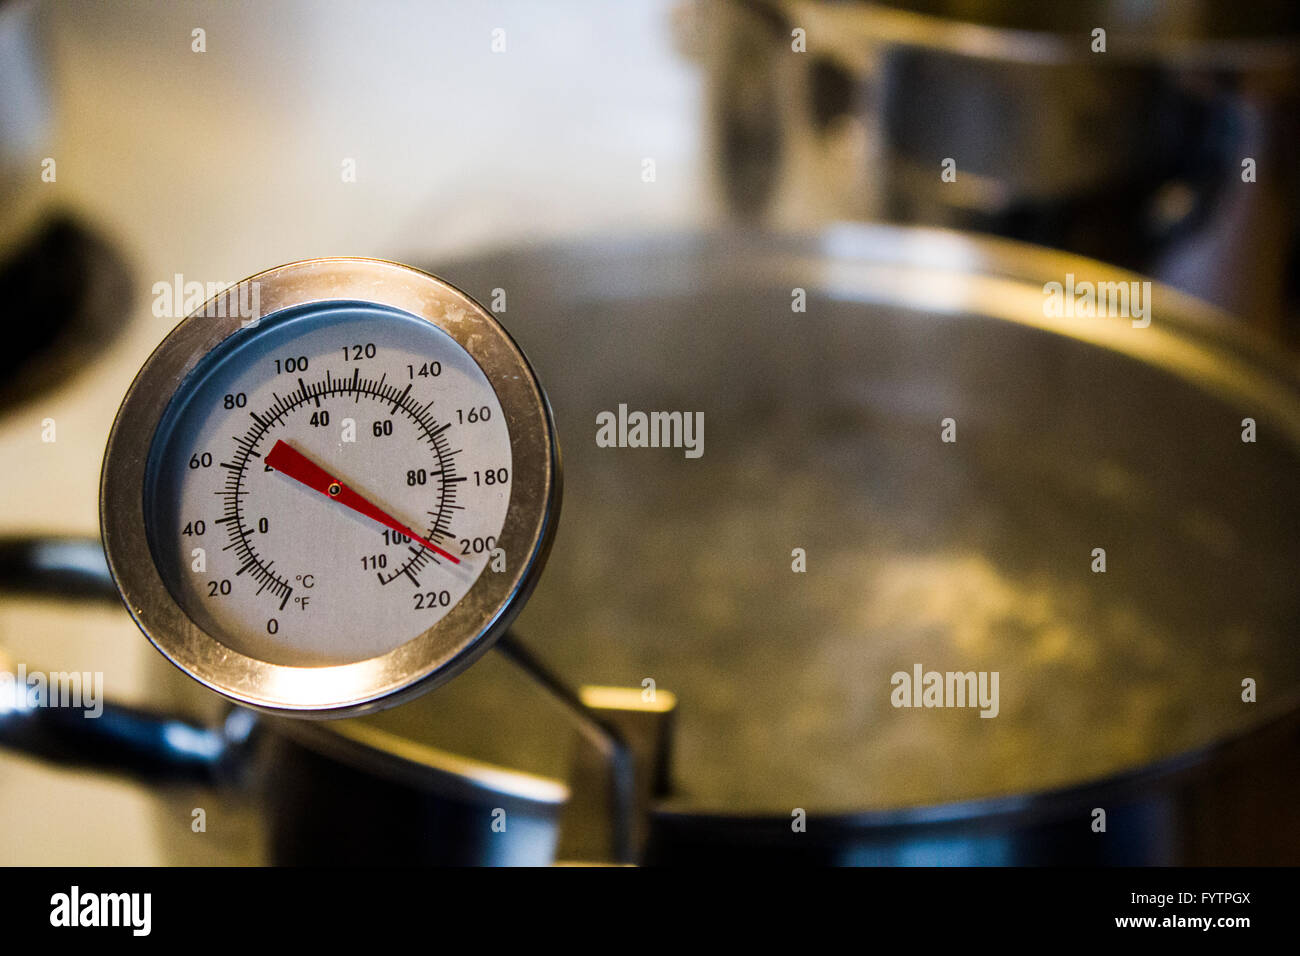 How to Test & Calibrate Your Brewing Thermometer